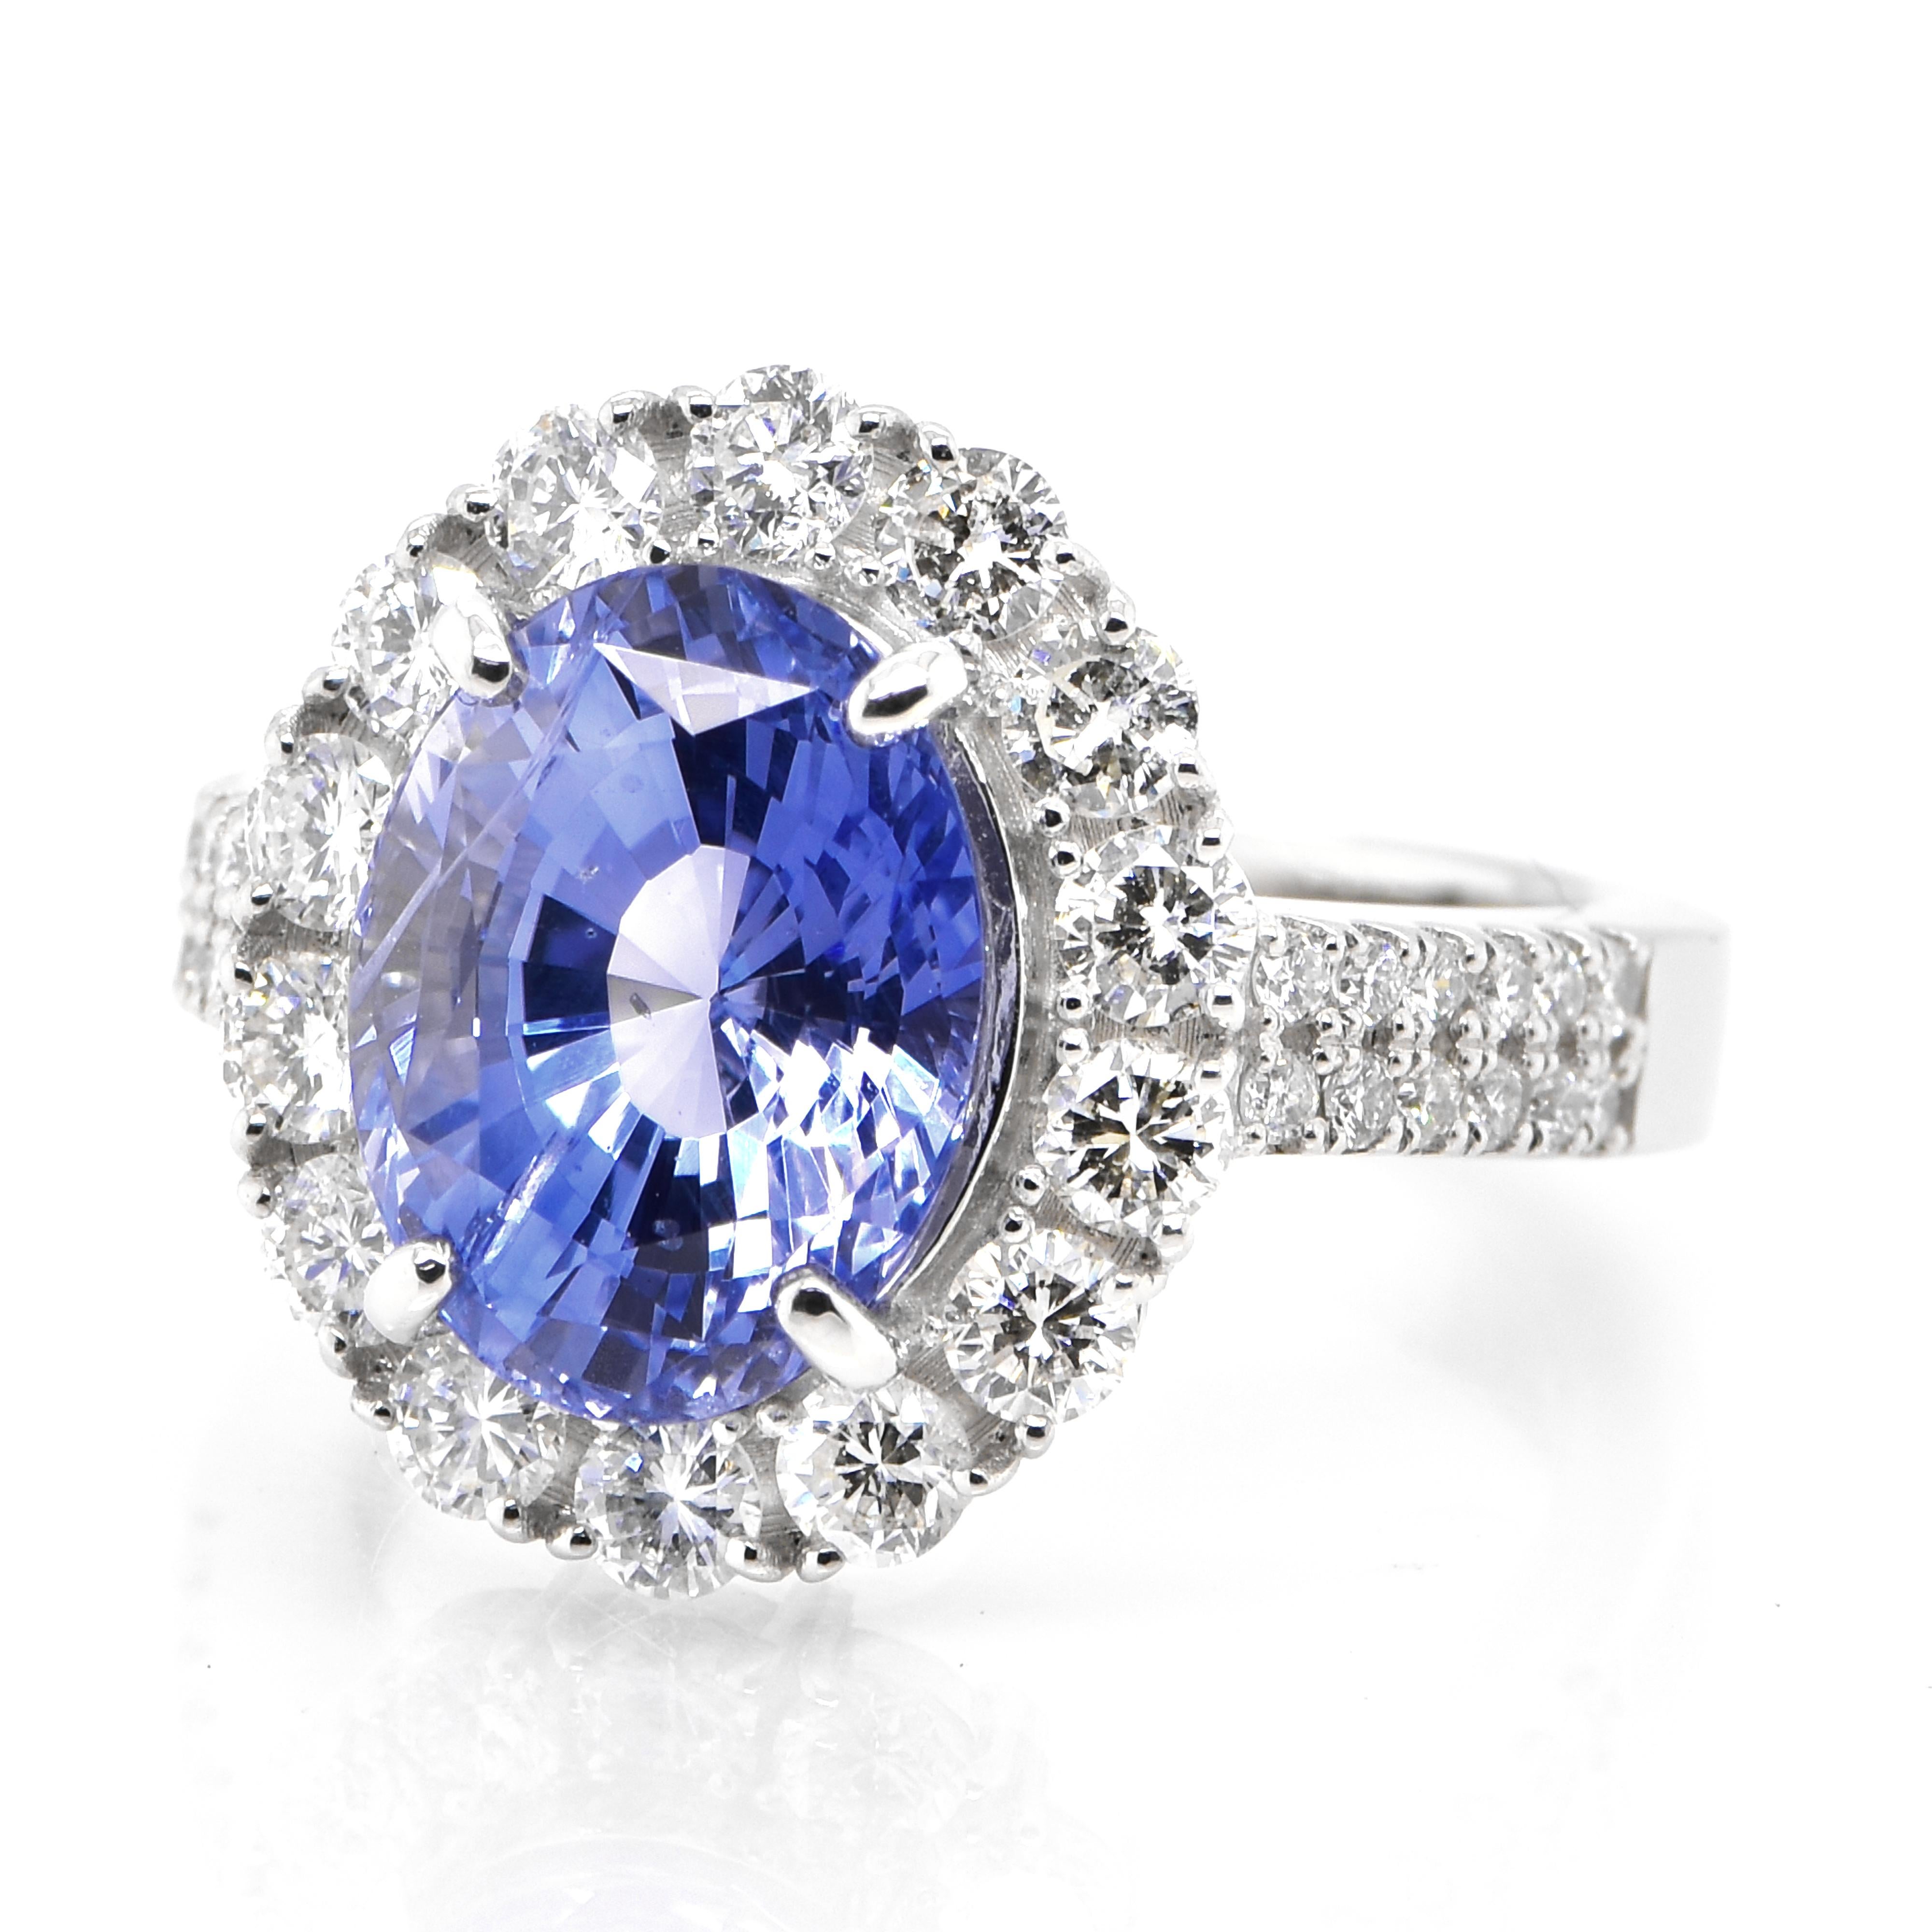 A beautiful ring featuring 6.006 Carat Natural Unheated Sapphire and 1.27 Carats Diamond Accents set in Platinum. Sapphires have extraordinary durability - they excel in hardness as well as toughness and durability making them very popular in